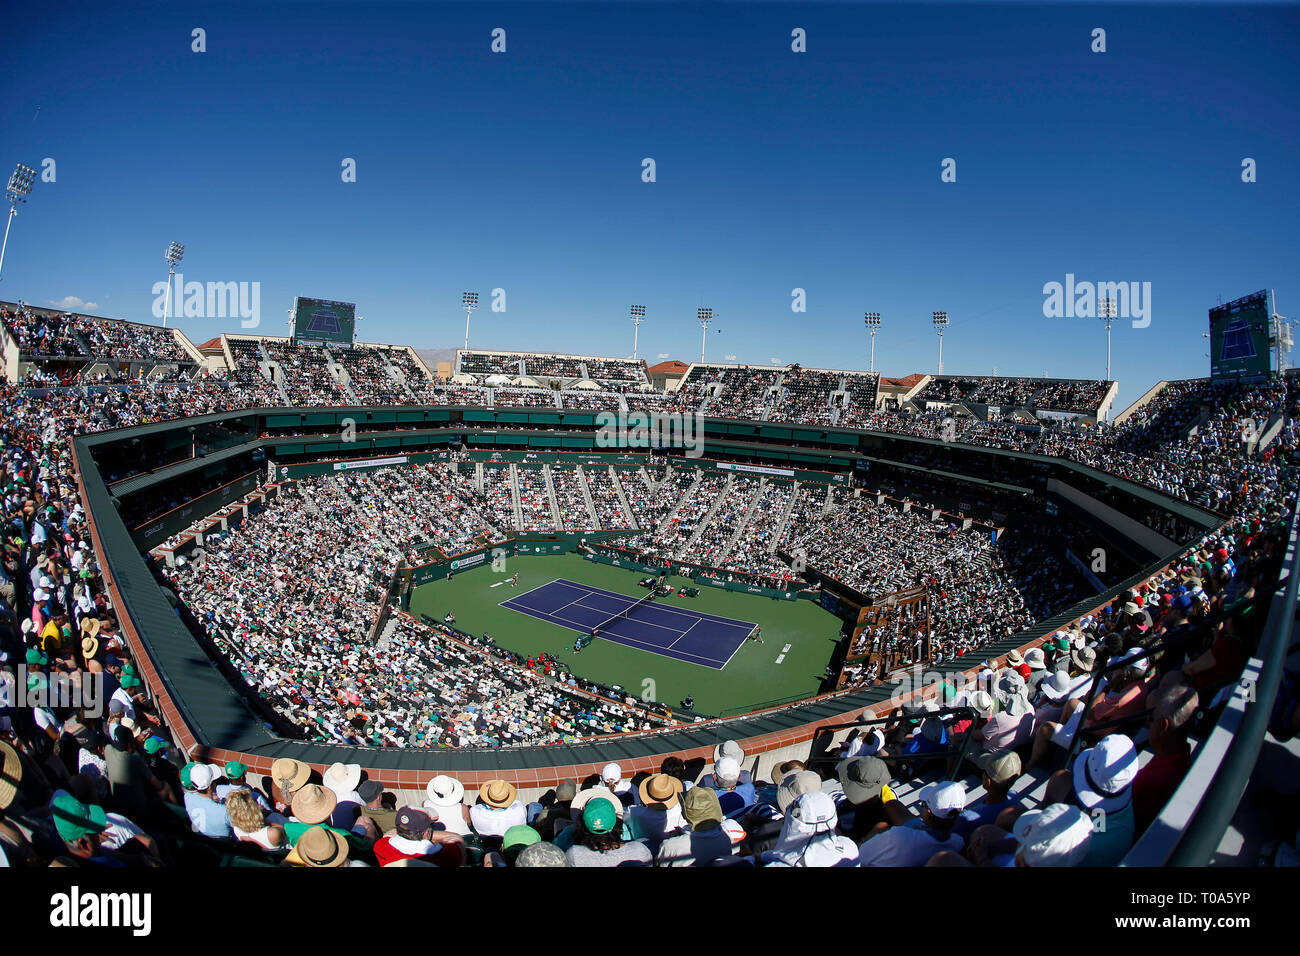 March 17, 2019 General view of Stadium 1 during the women's singles final match between Angelique Kerber (GER) and Bianca Andreescu (CAN) at the 2019 BNP Paribas Open at Indian Wells Tennis Garden in Indian Wells, California. Charles Baus/CSM Stock Photo